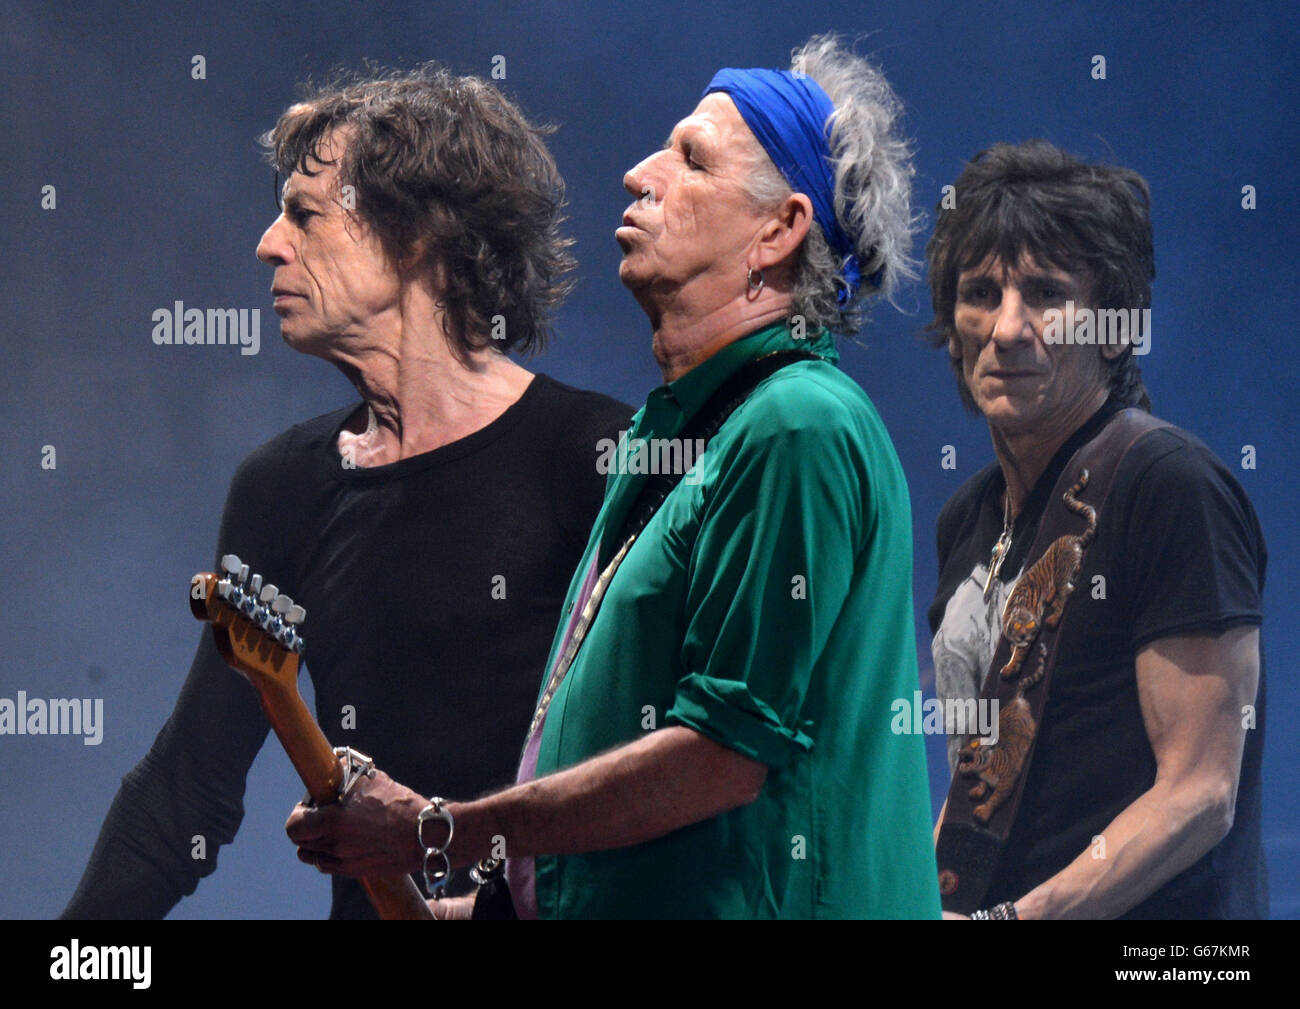 (left to right) Mick Jagger, Keith Richards and Ronnie Wood from the Rolling Stones perform on the Pyramid Stage during the Glastonbury 2013 Festival of Contemporary Performing Arts at Pilton Farm, Somerset. Stock Photo